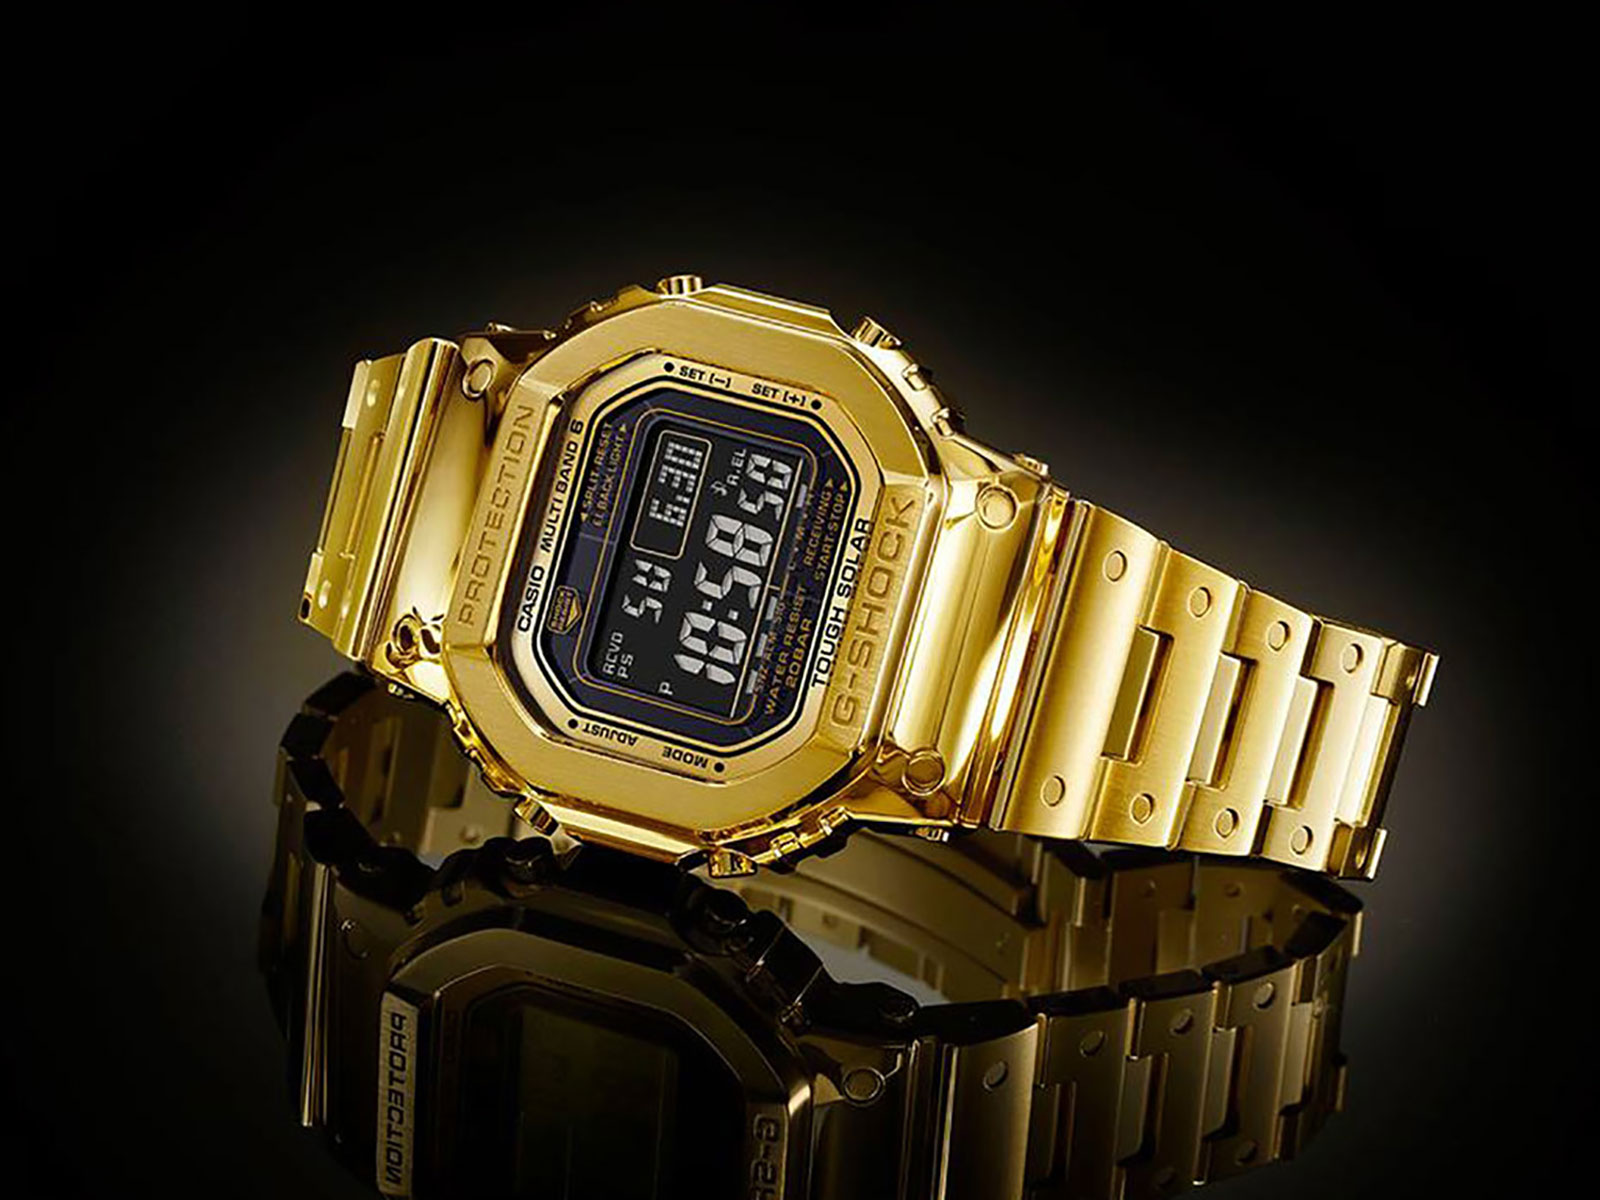 Introducing the $70,000 G-Shock “Dream Project” Solid, Yellow Gold | SJX Watches